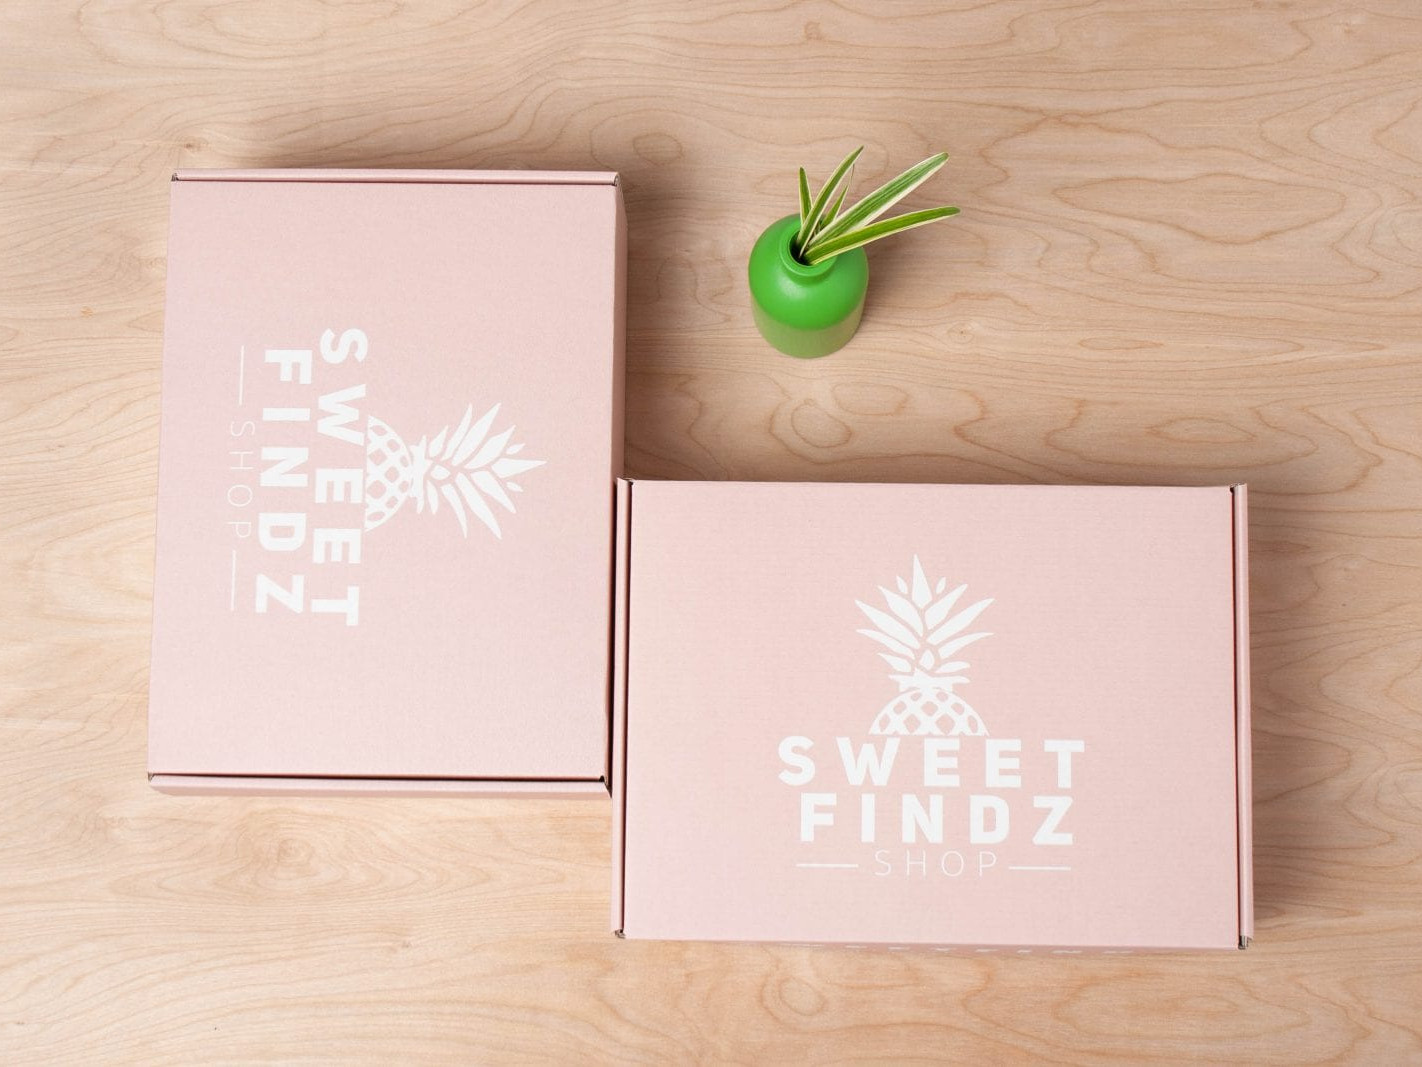 Pink boxes for Sweet Findz